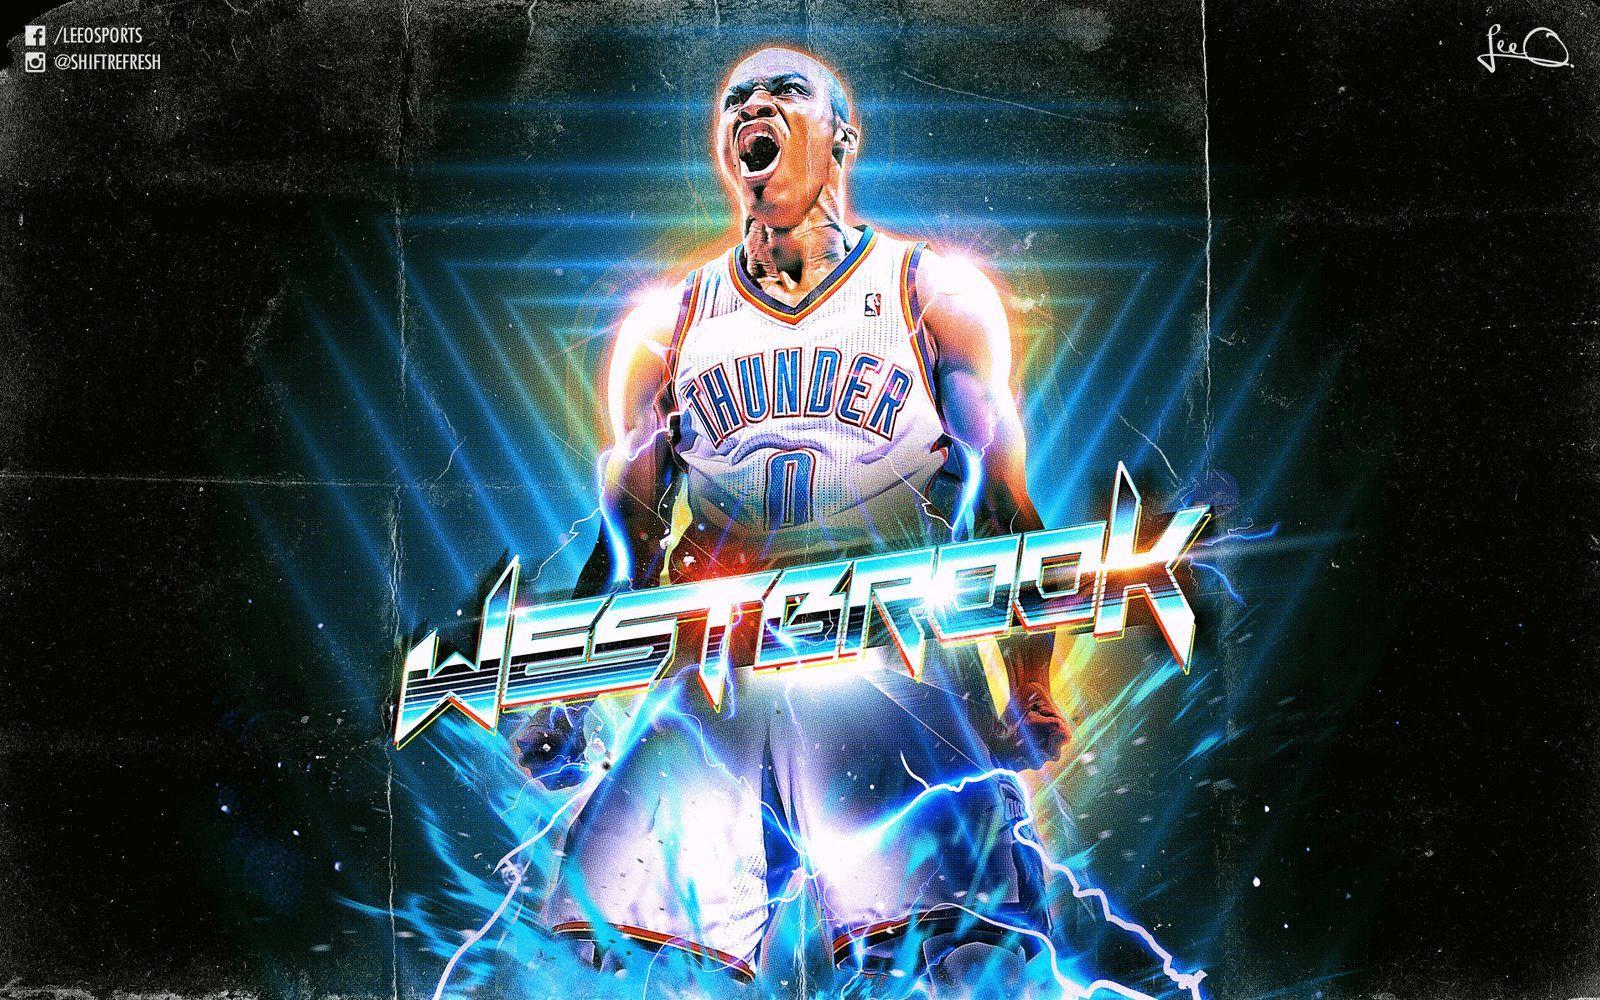 Russell Westbrook Wallpaper Image Photo Picture Background 1600